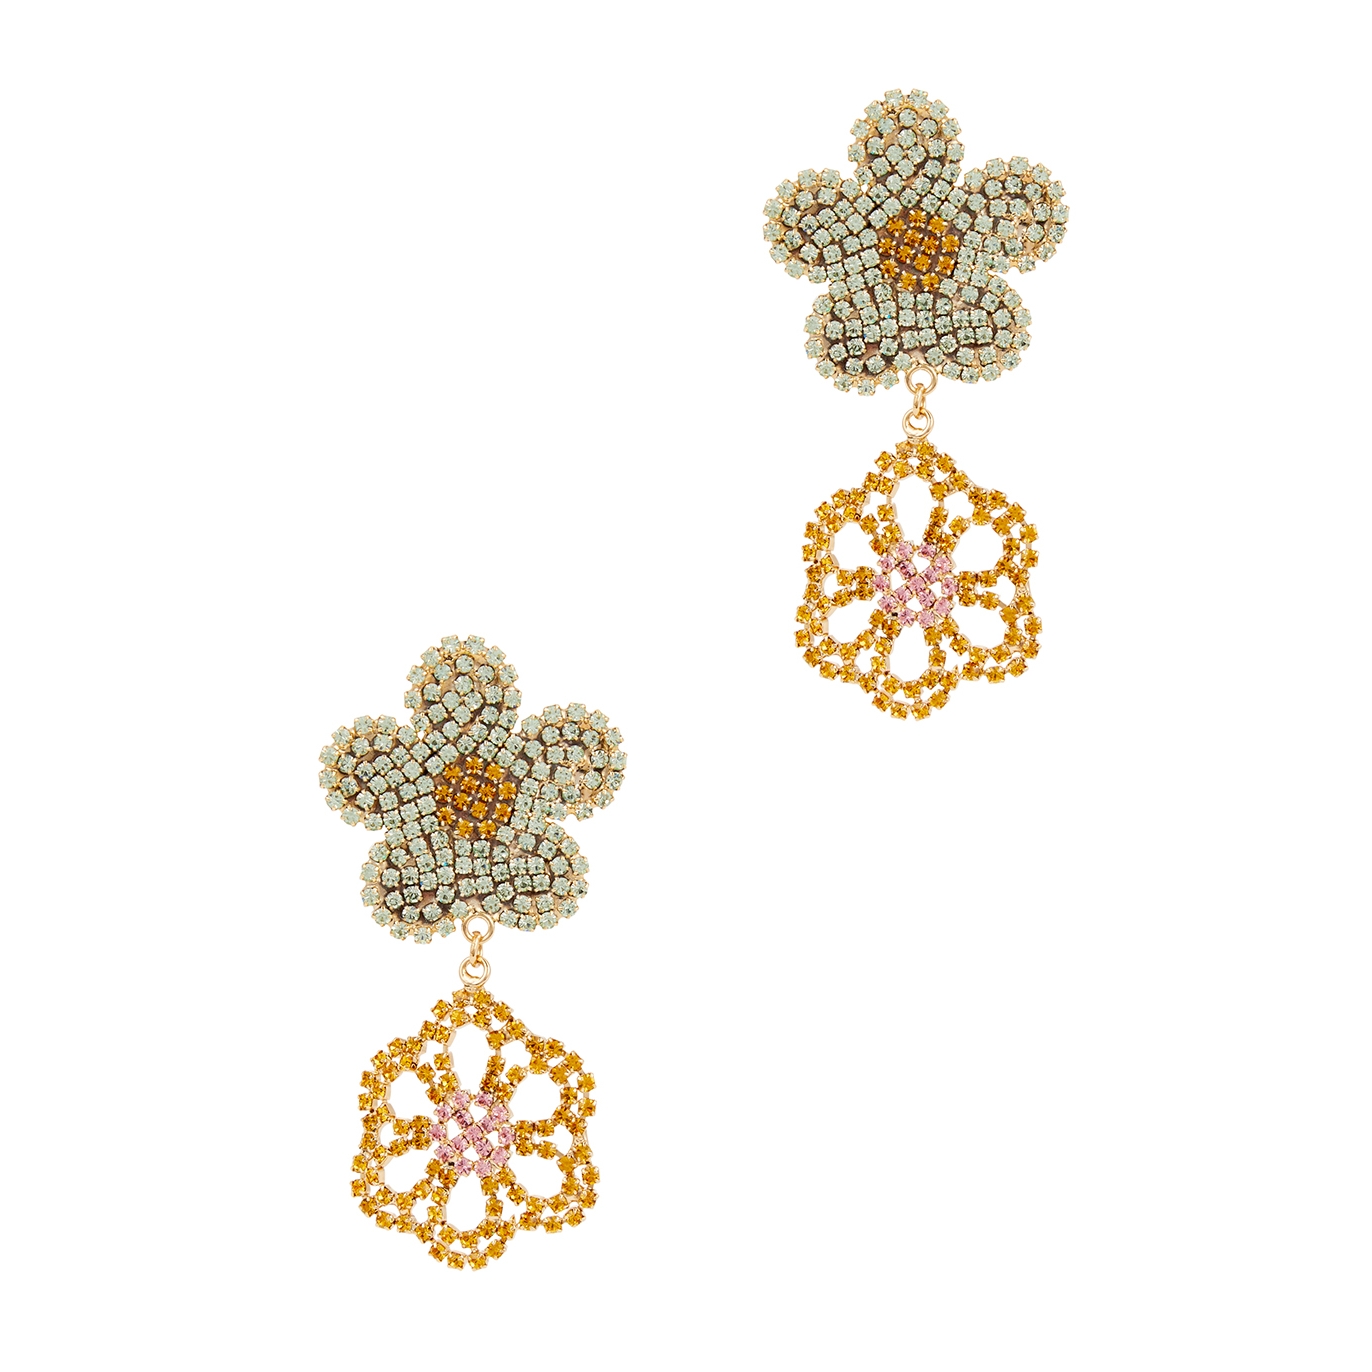 ROSANTICA FIORDALISO FLORAL-EMBELLISHED CLIP-ON EARRINGS